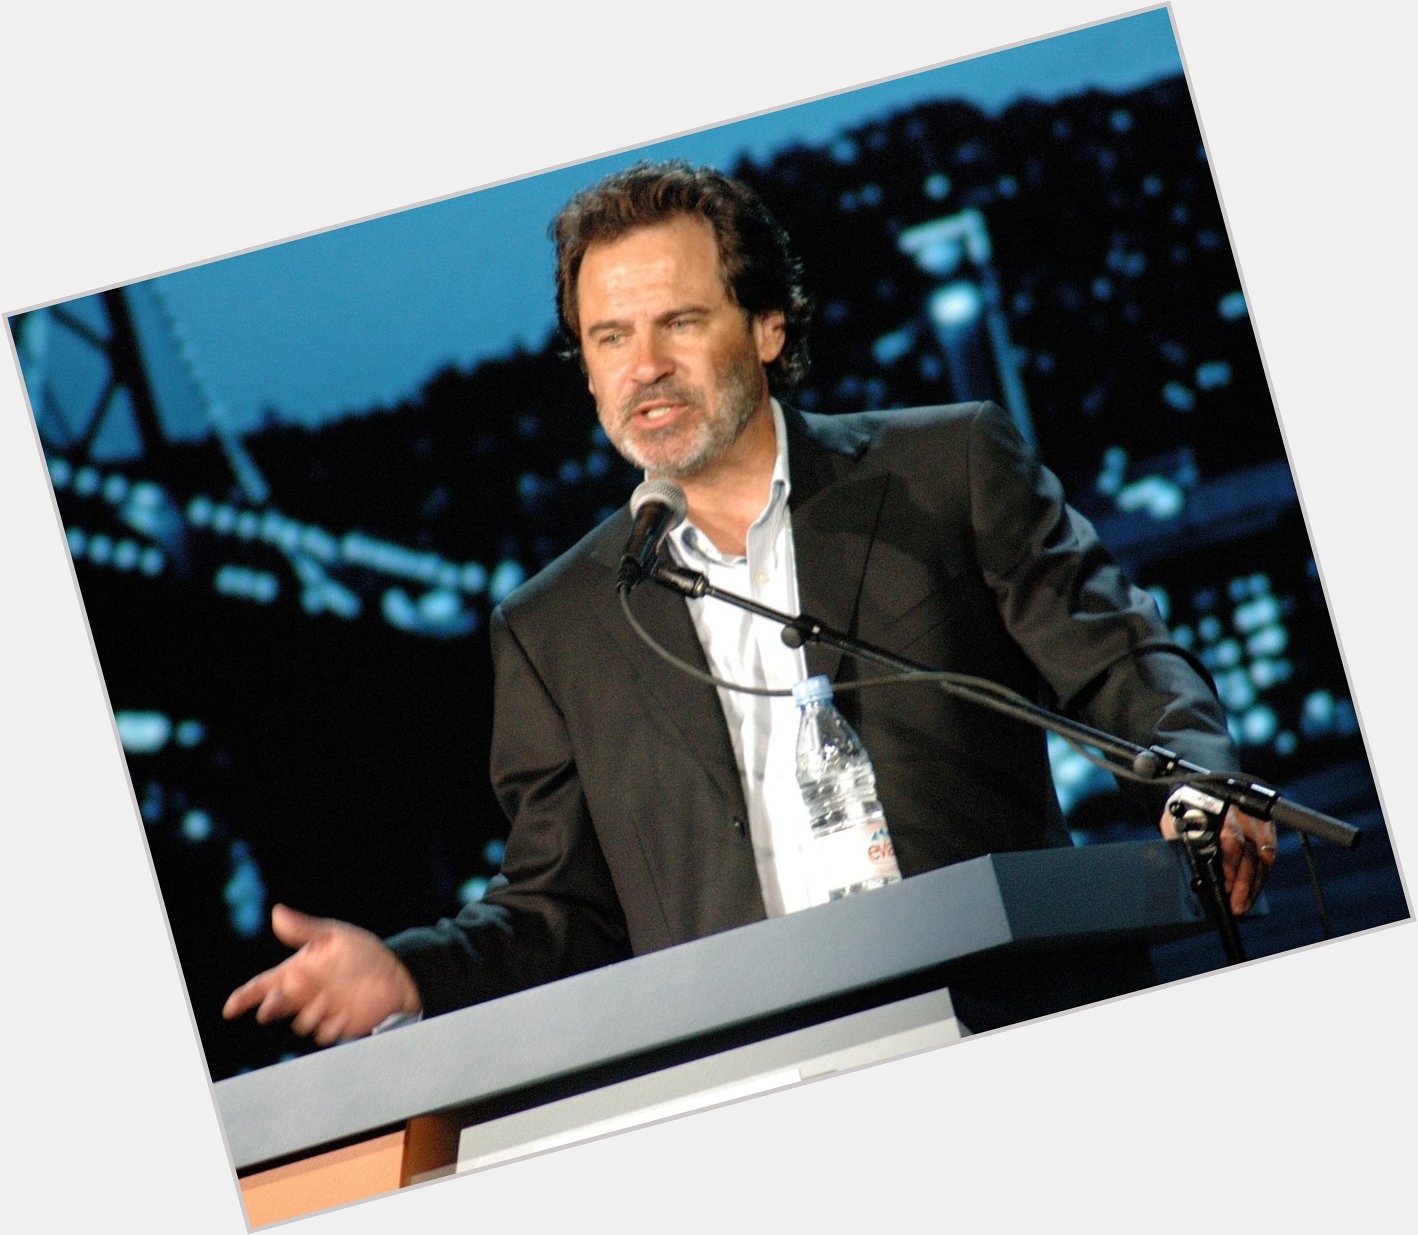 Happy Birthday to Dennis Miller, who turns 61 today! 